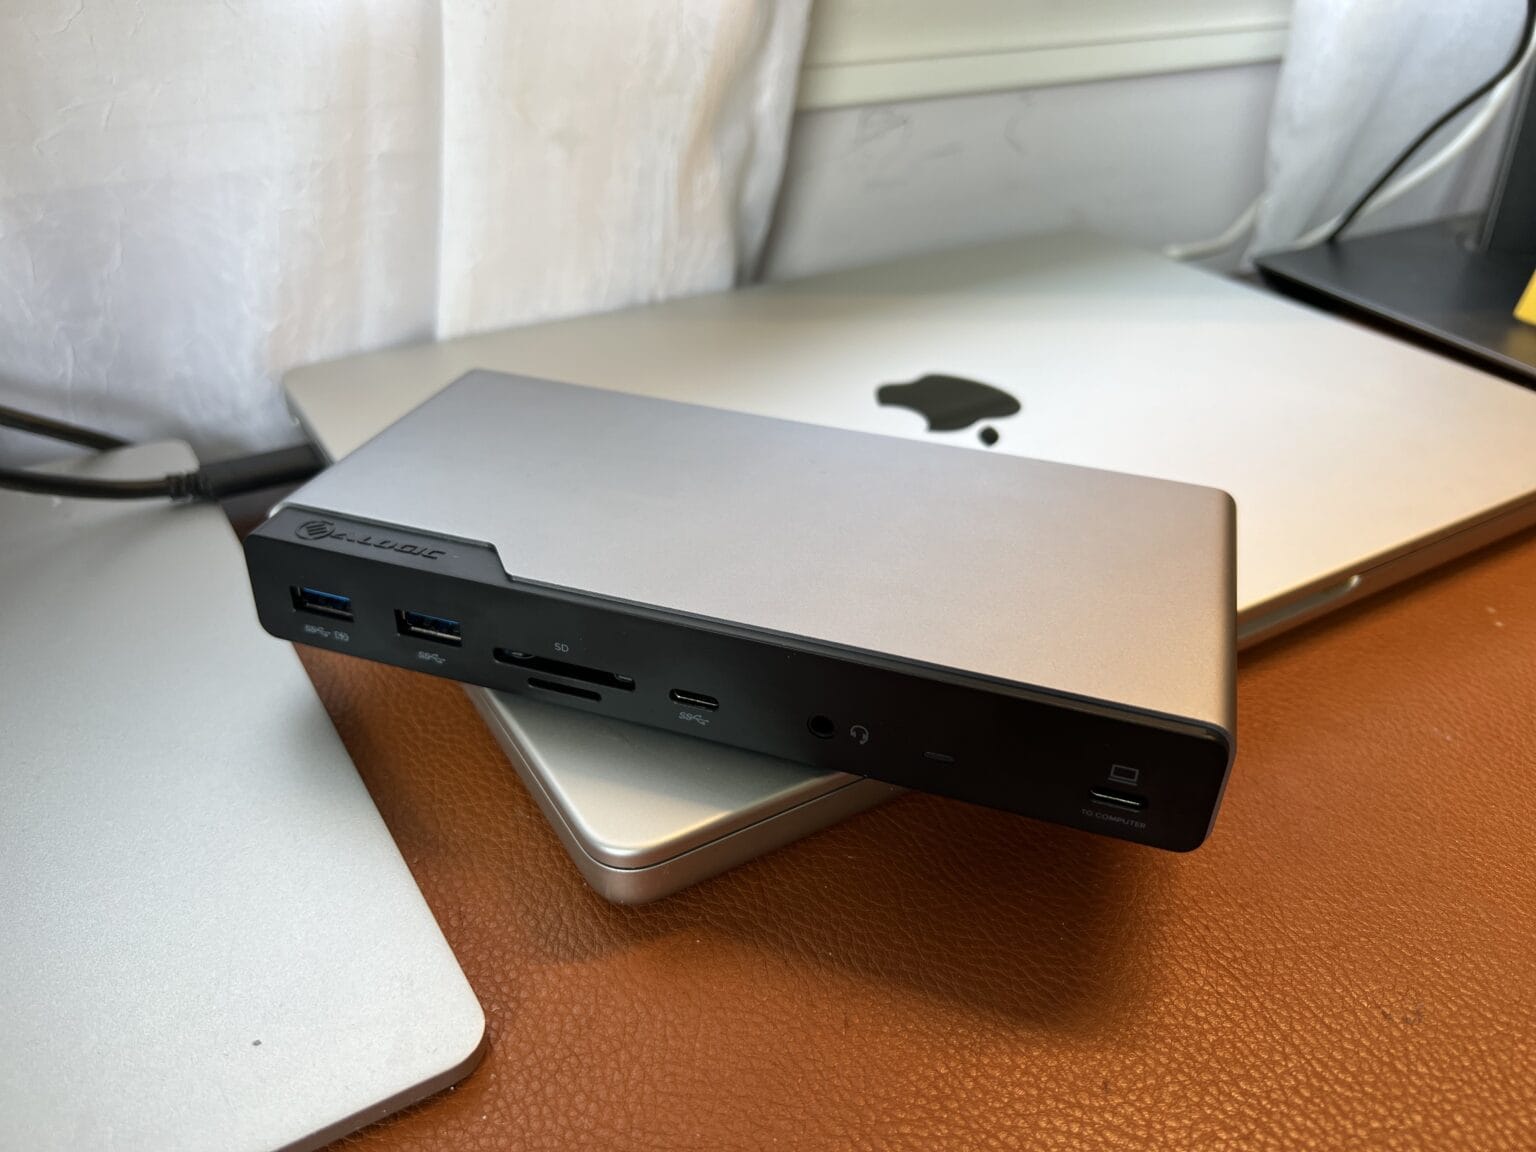 This slim dock does a lot. You can run three external displays with your MacBook and hook up several other peripherals.